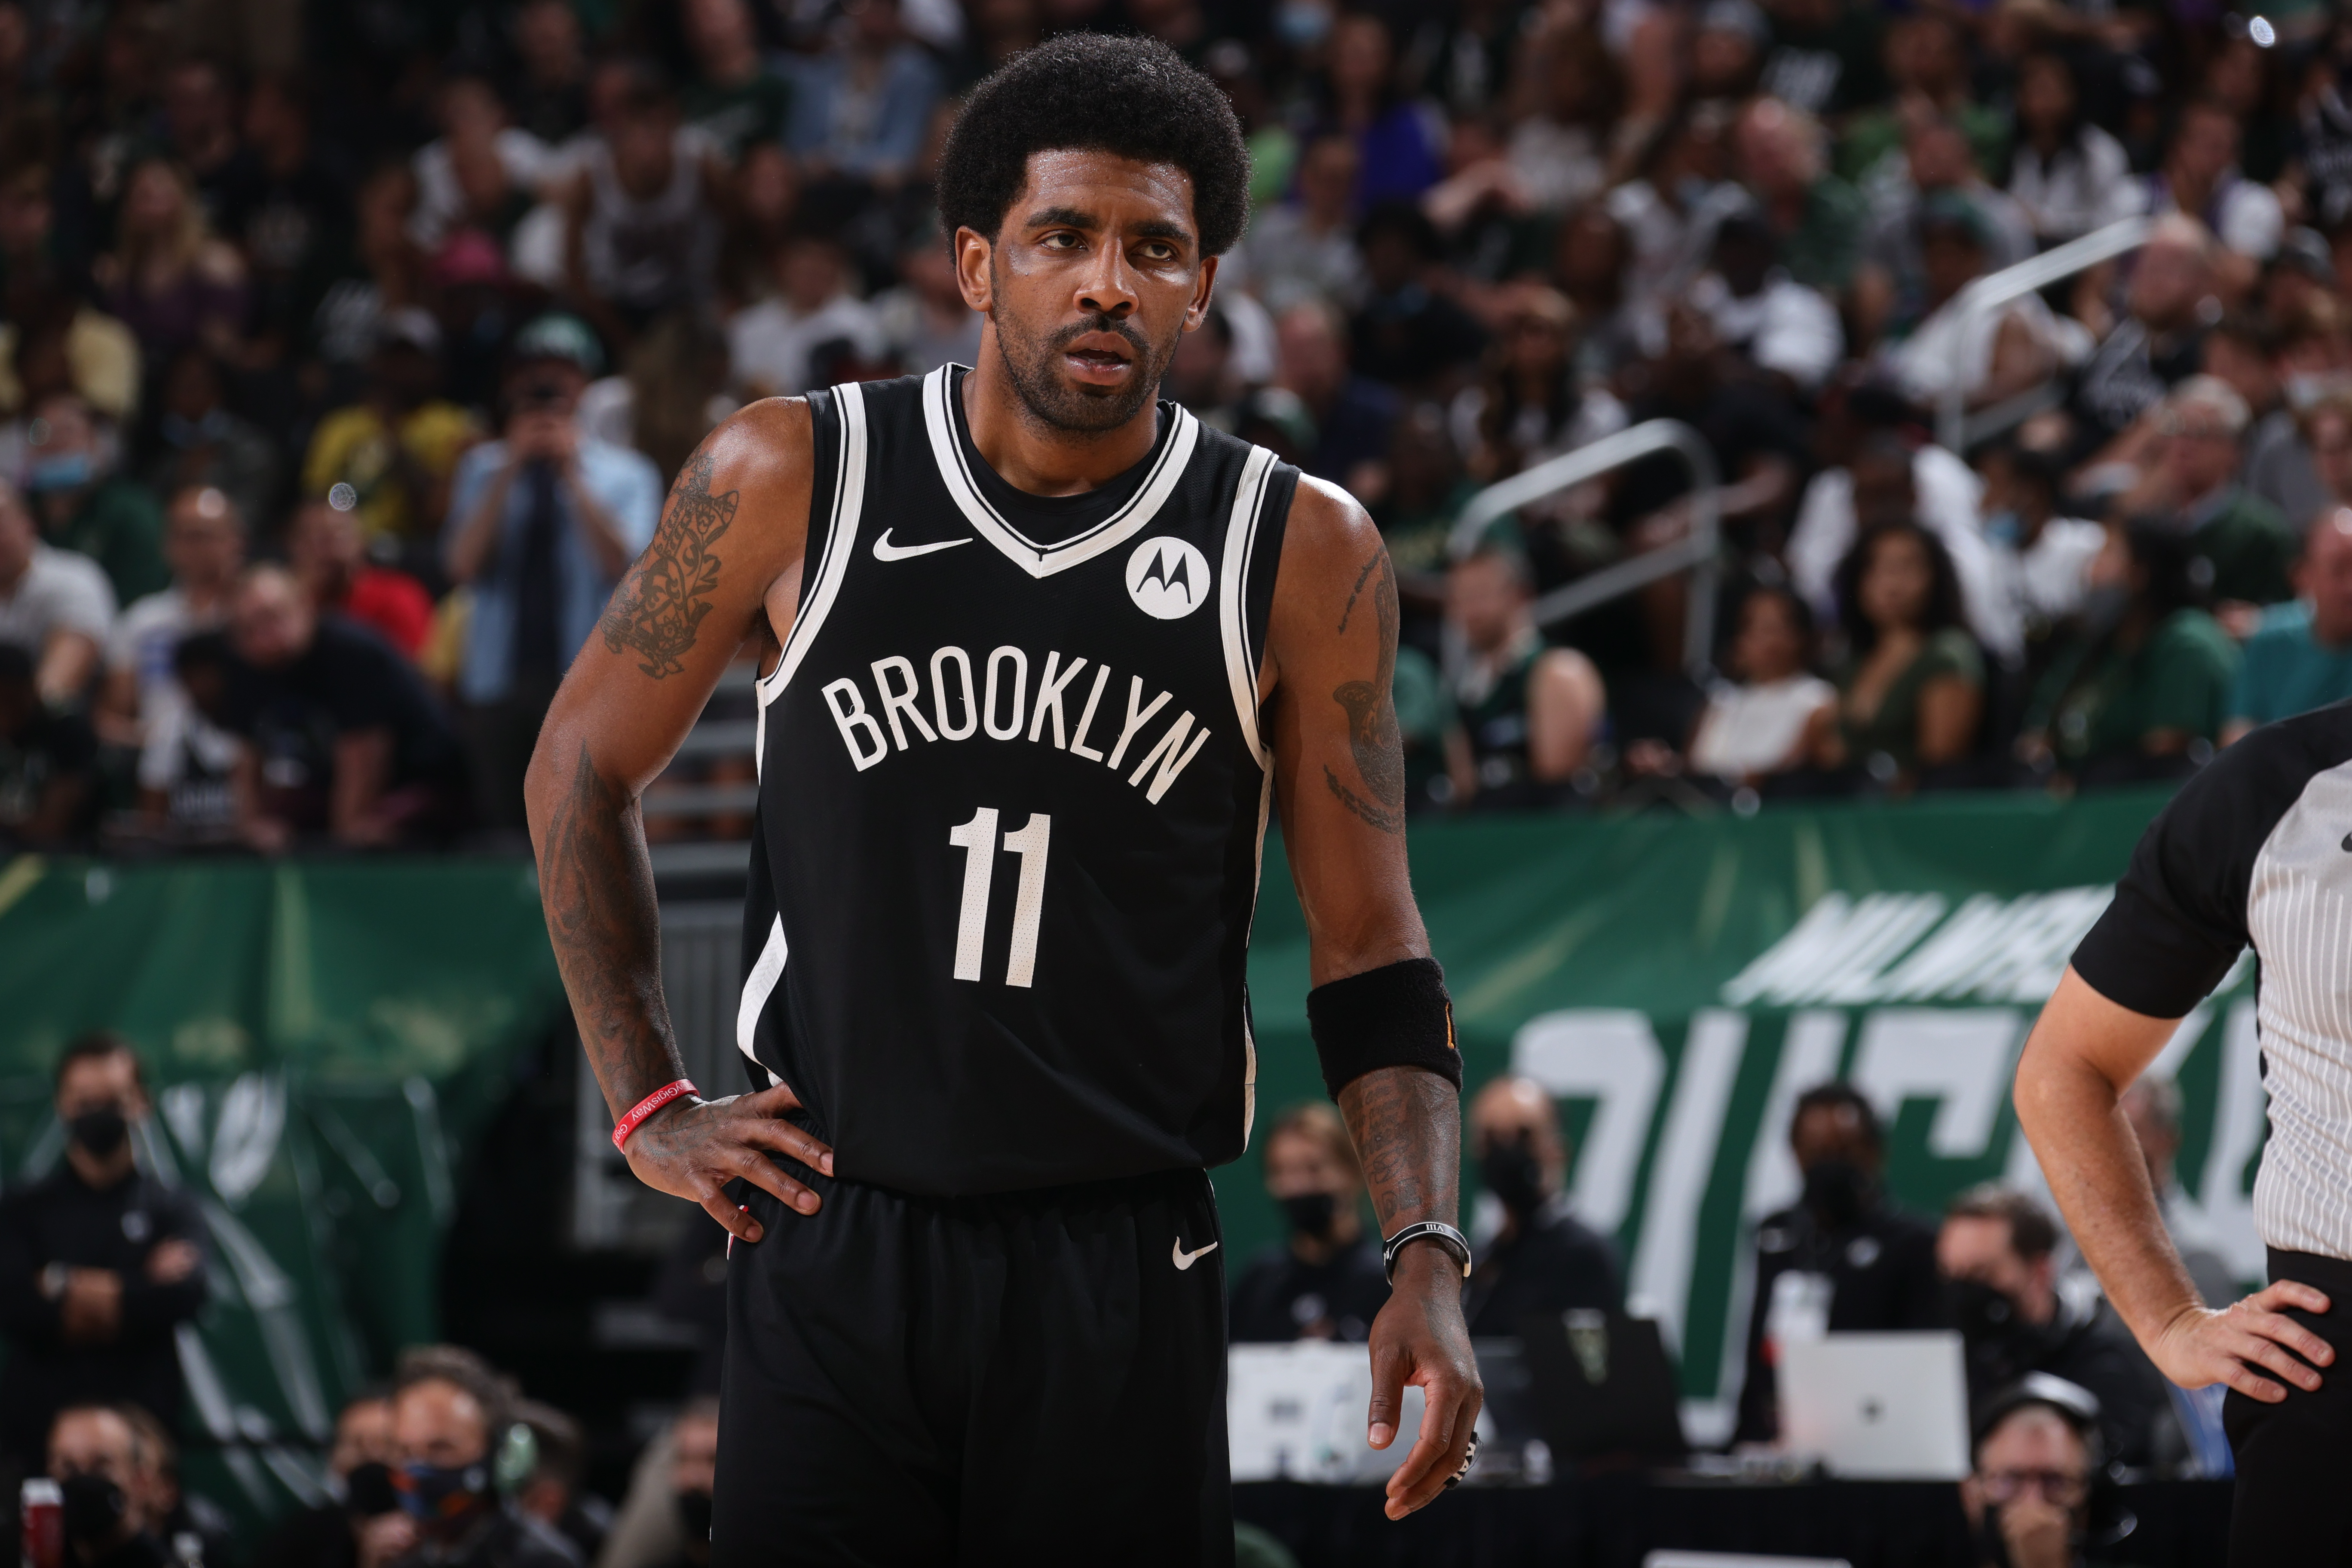 Brooklyn Nets Kyrie Irving Returns to the Court Sunday Night